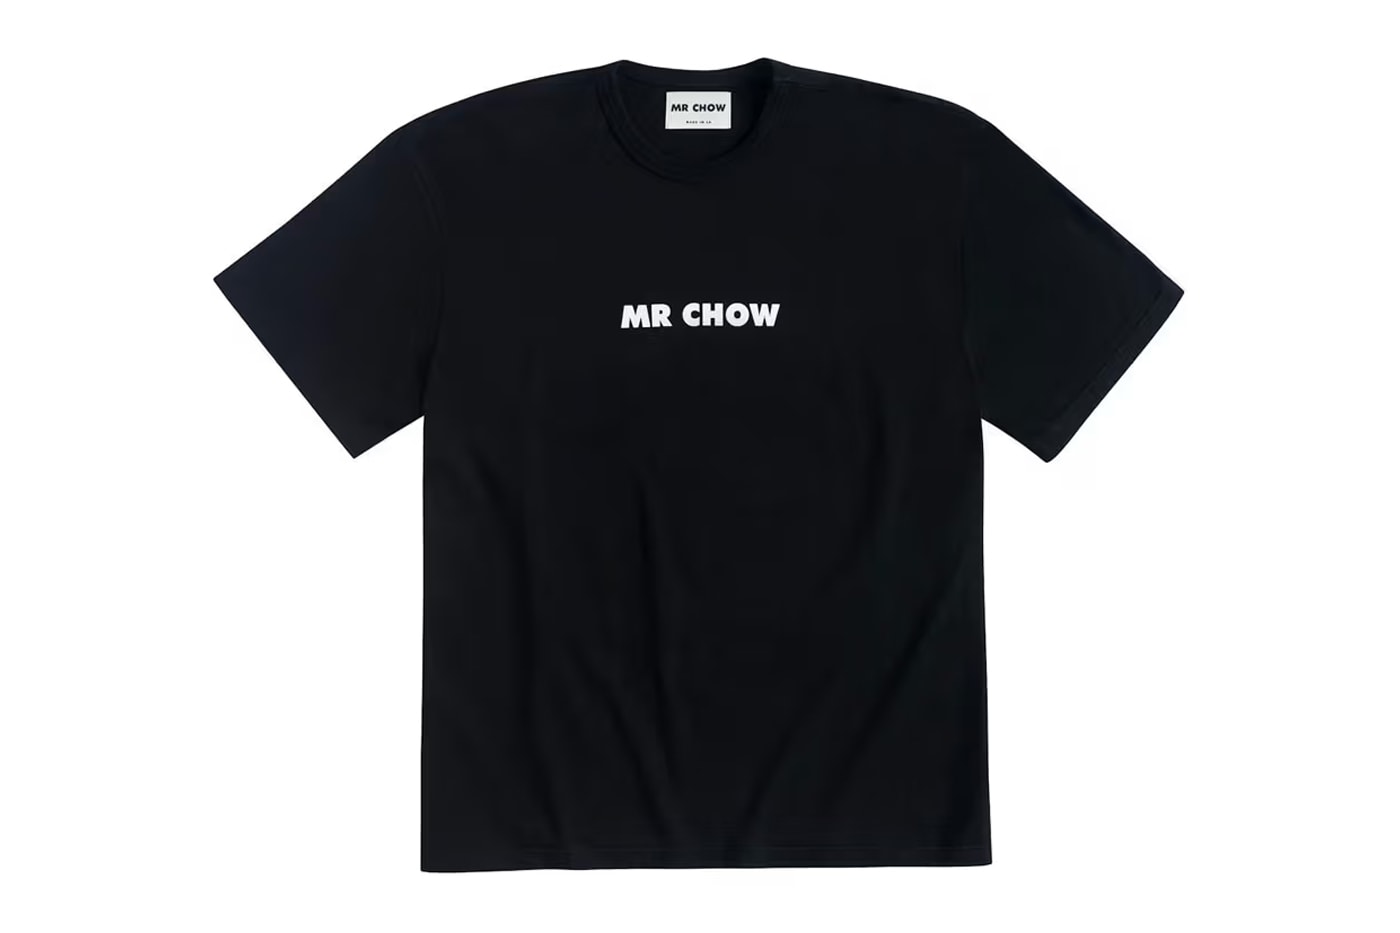 Mr Chow Serves Up First-Ever Clothing Line food culinary chef cuisine restaurant price link drop release vanessa chow collab andy warhol art price joggers hoodie t shirt graphic print helmut newton madonna chinese food 